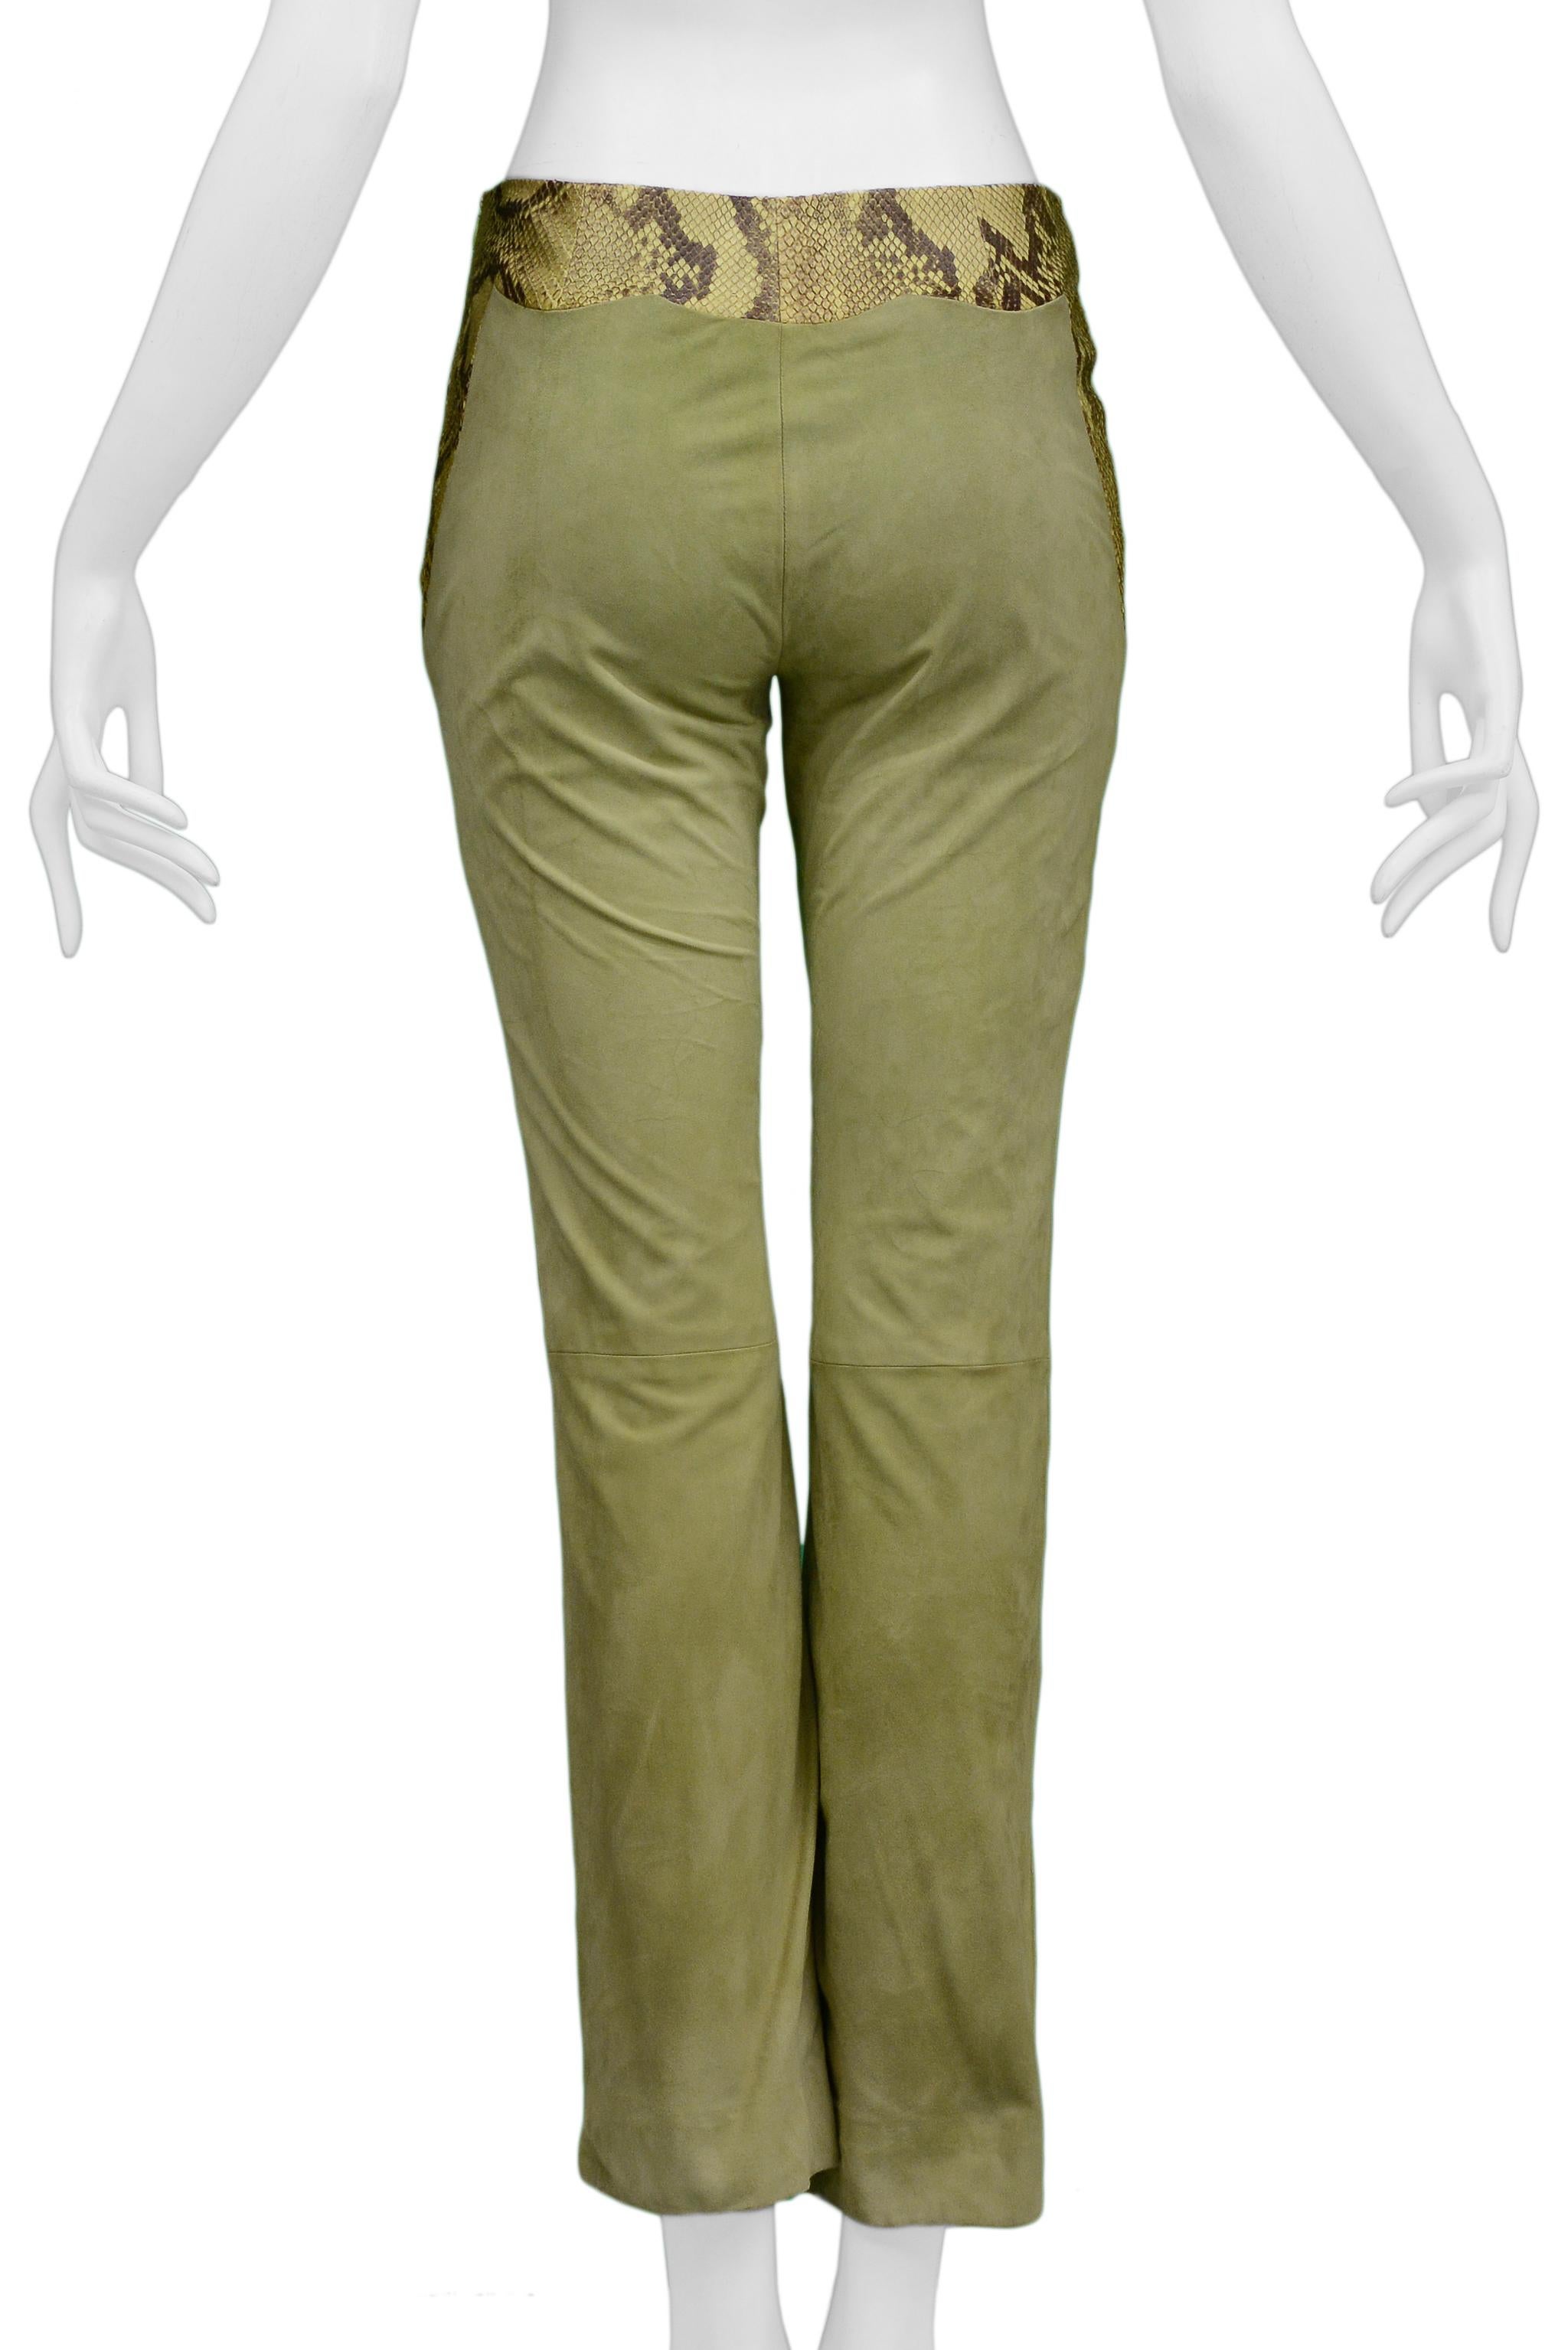 Brown Stunning Versace Green & Snake Print Suede & Leather Pants   For Sale